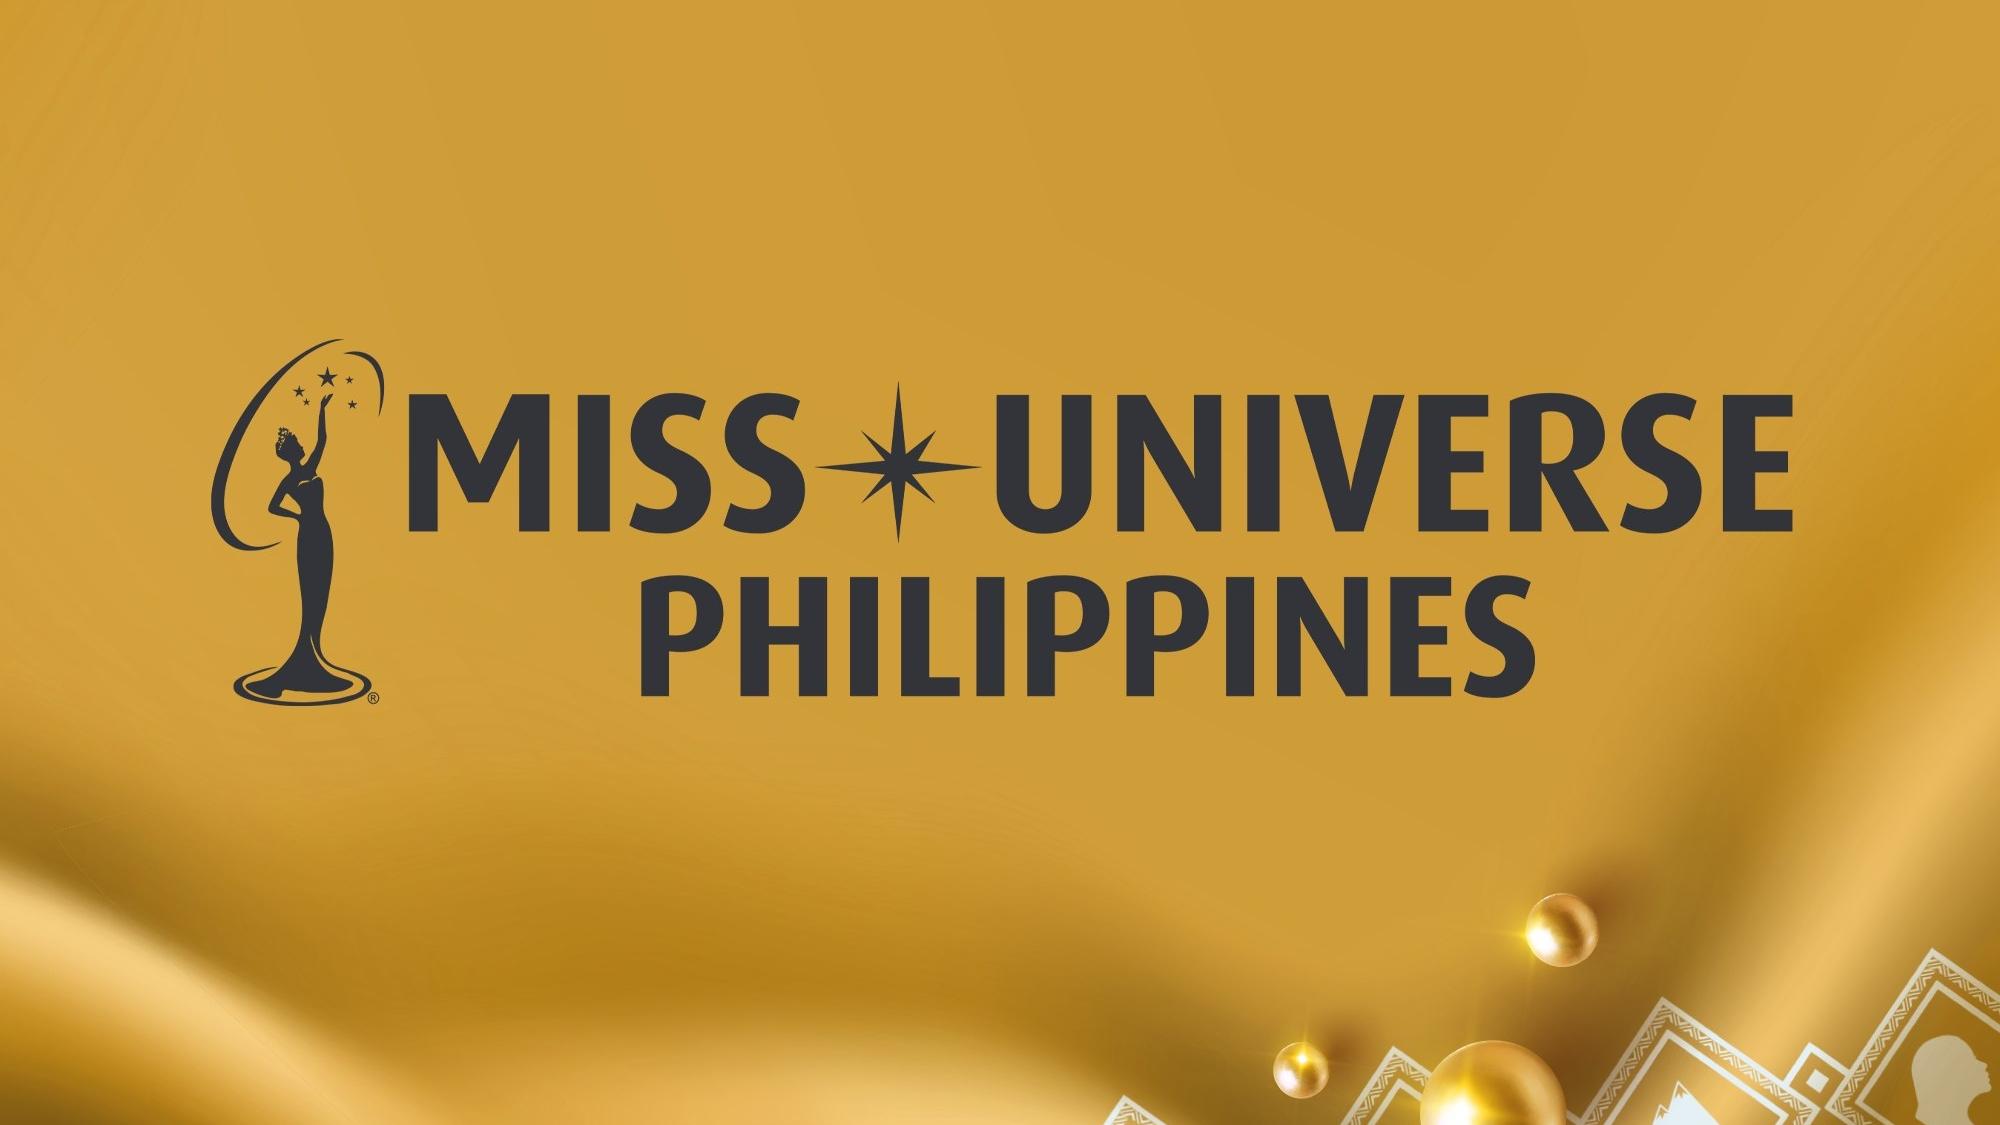 Miss Universe Philippines Opens Applications For 2023 Pageant Gma News Online